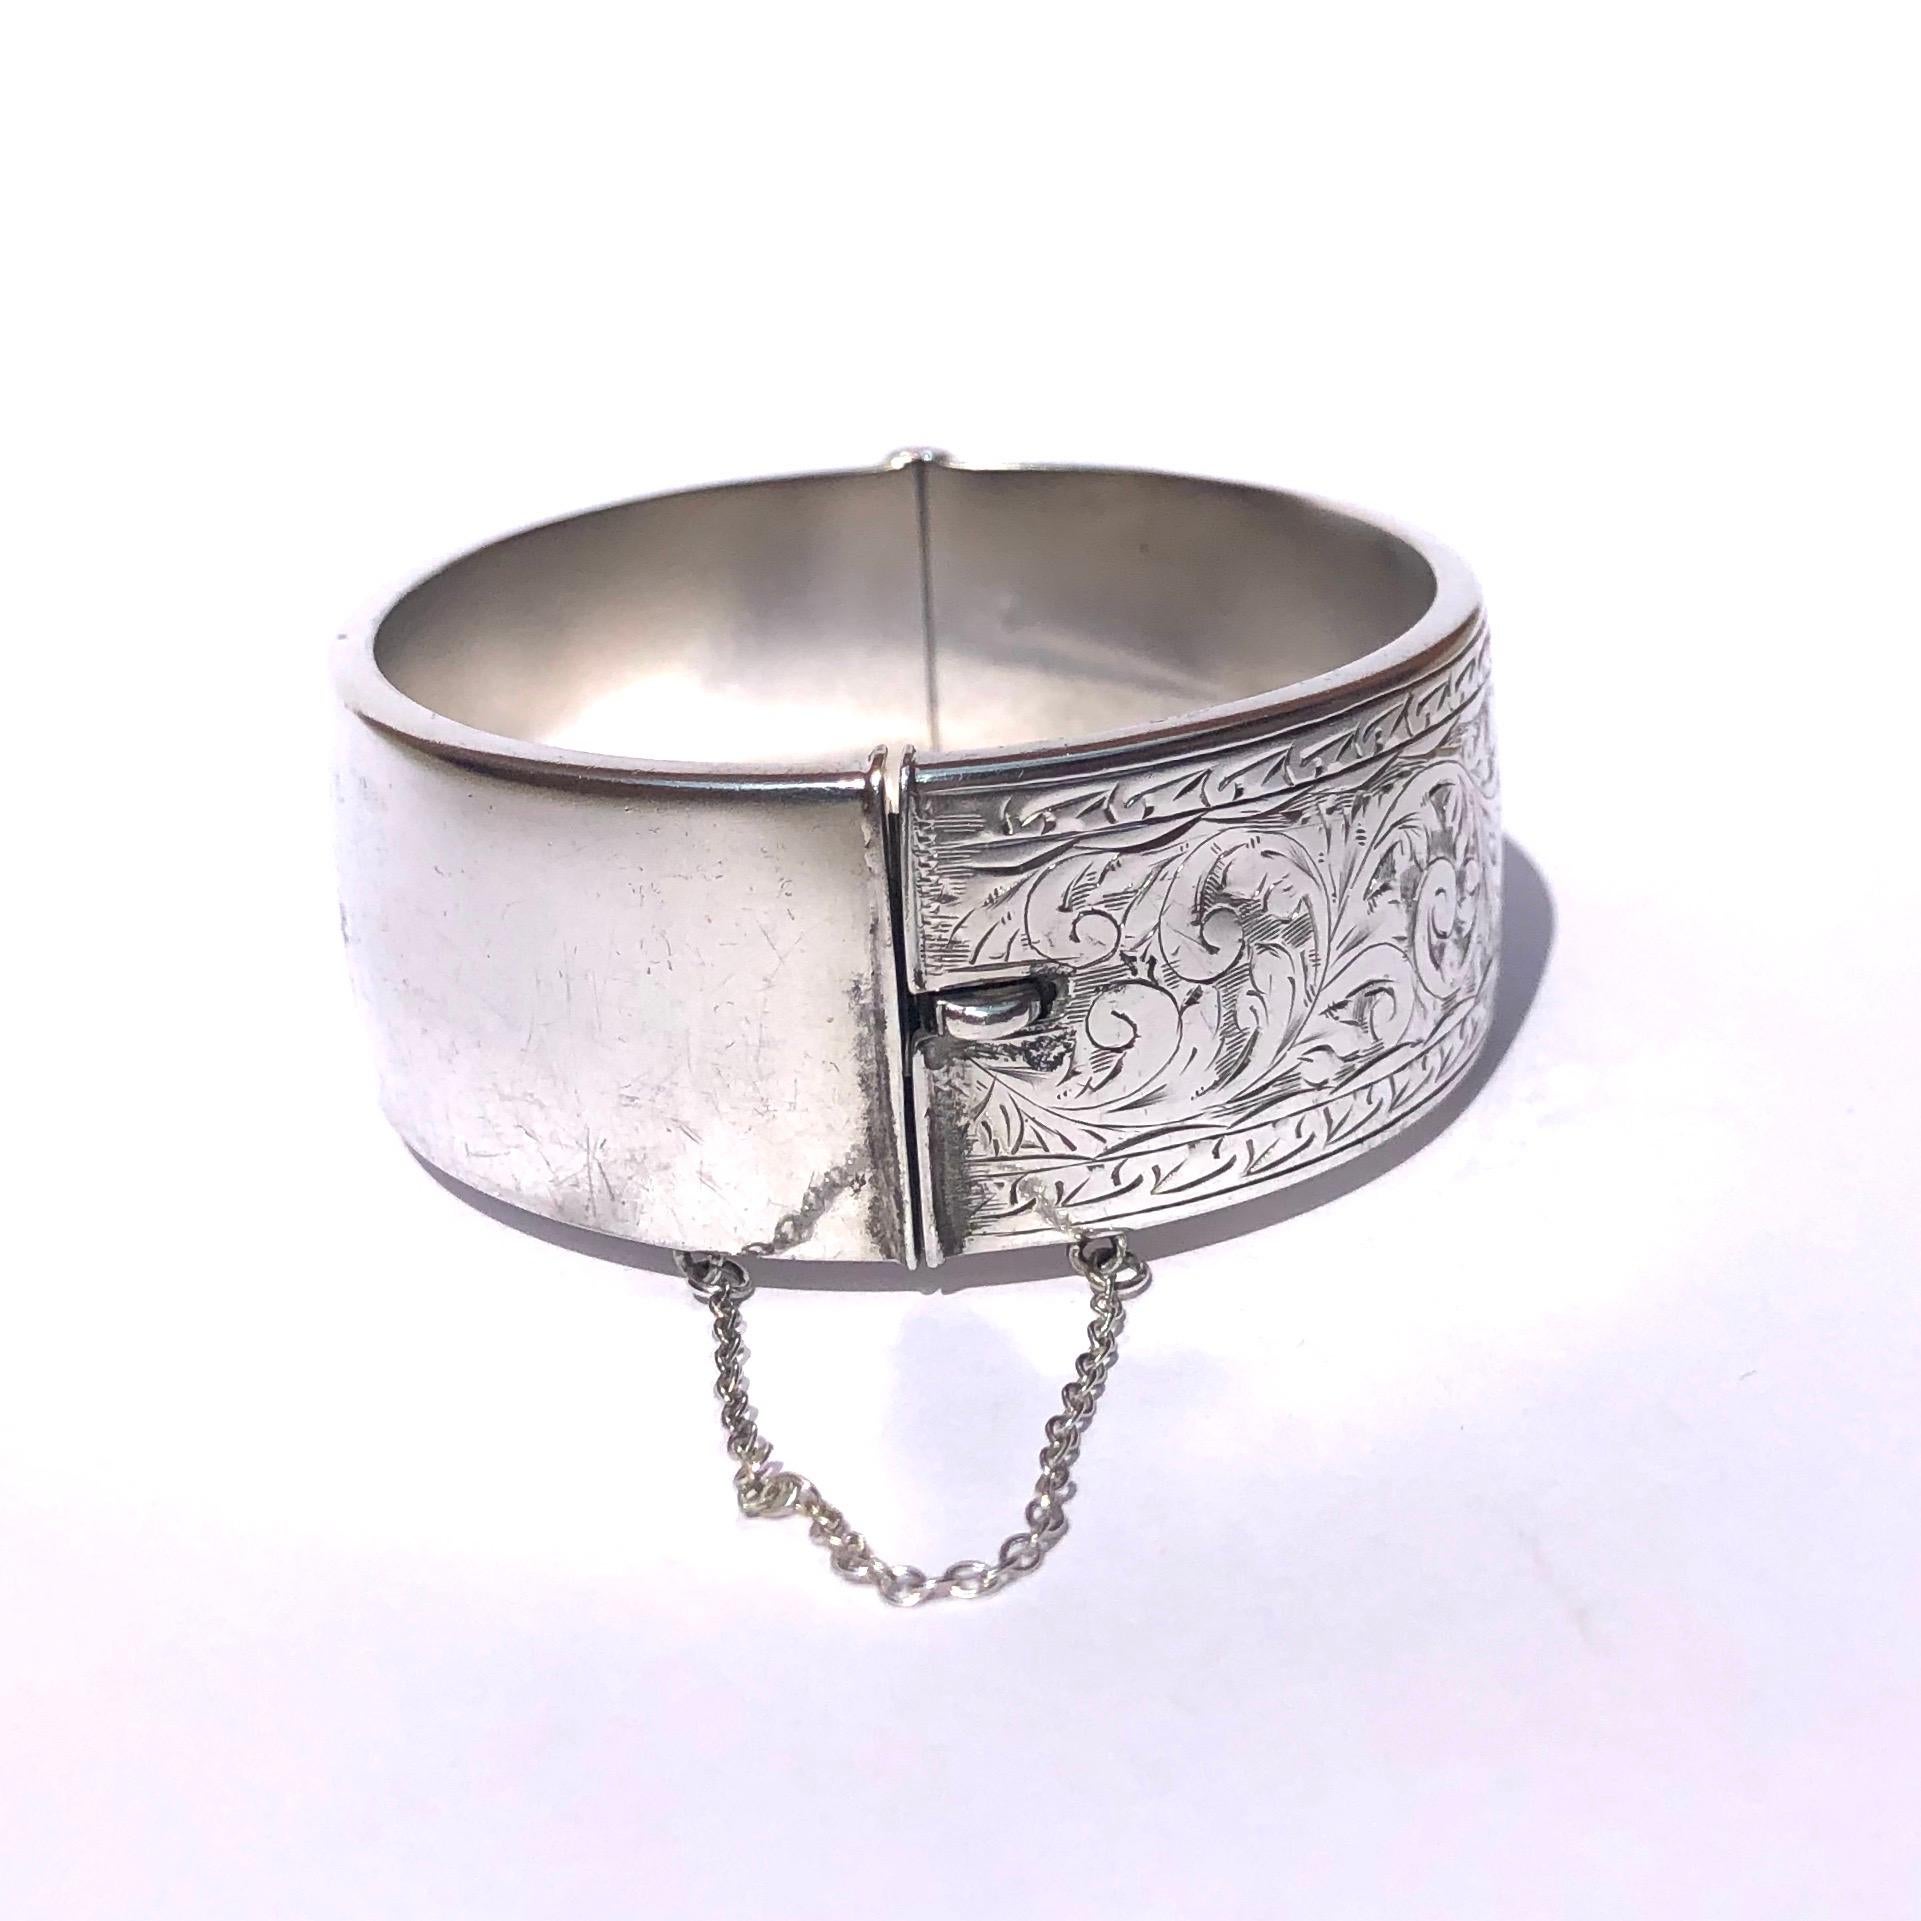 On the front panel of this bangle there is a gorgeous classic swirl detail and a decorative border. On the back of the bangle on the plain glossy panel there is an engraving which reads 'Laurie, All My Love, Doug'. Made in Chester, England.

Inner